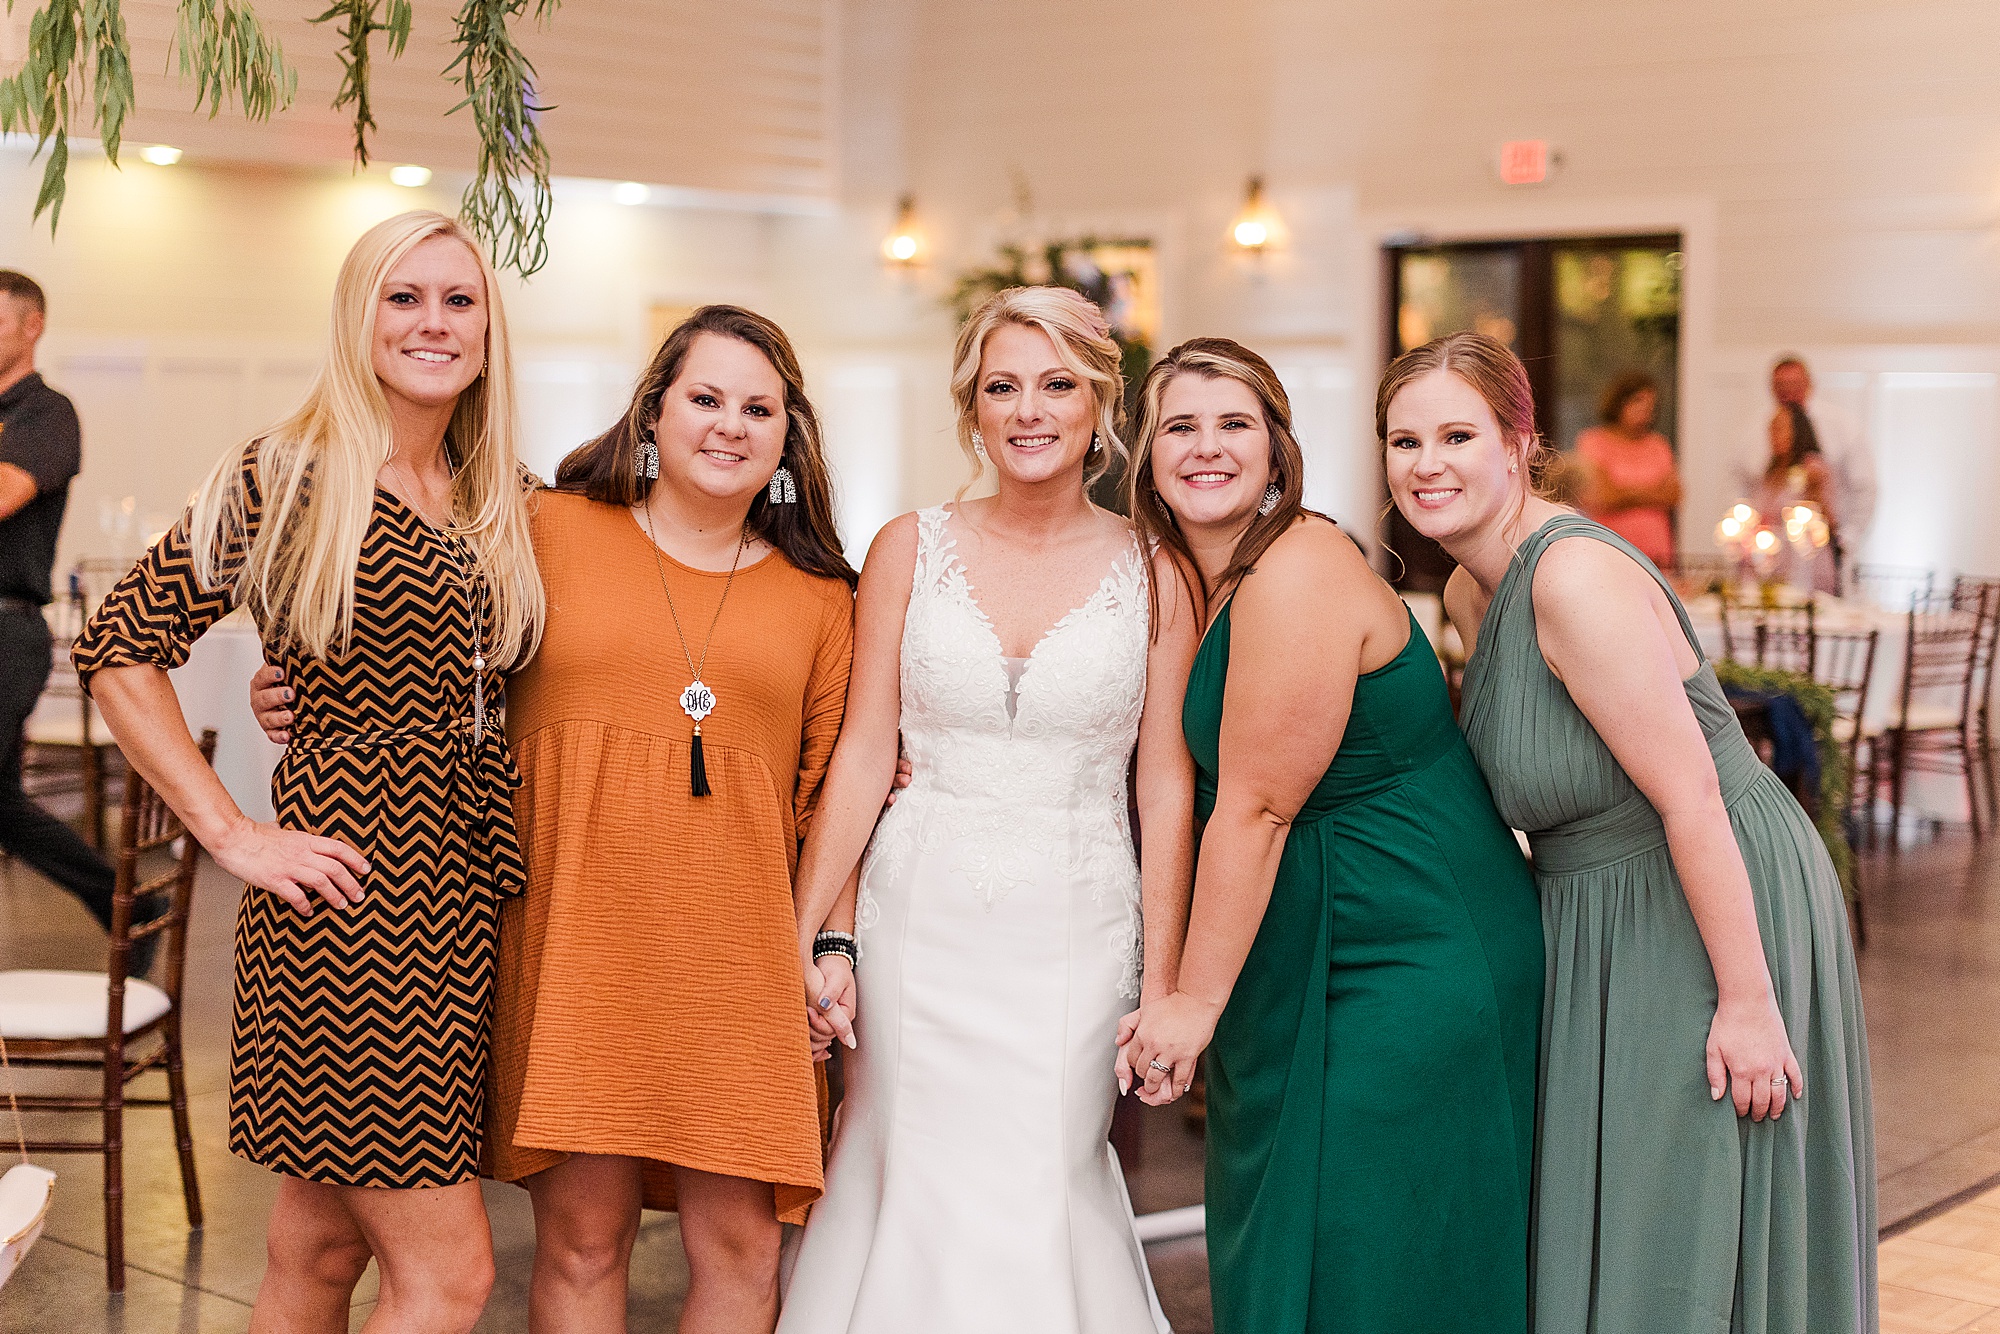 Bride posing with her friends at a wedding